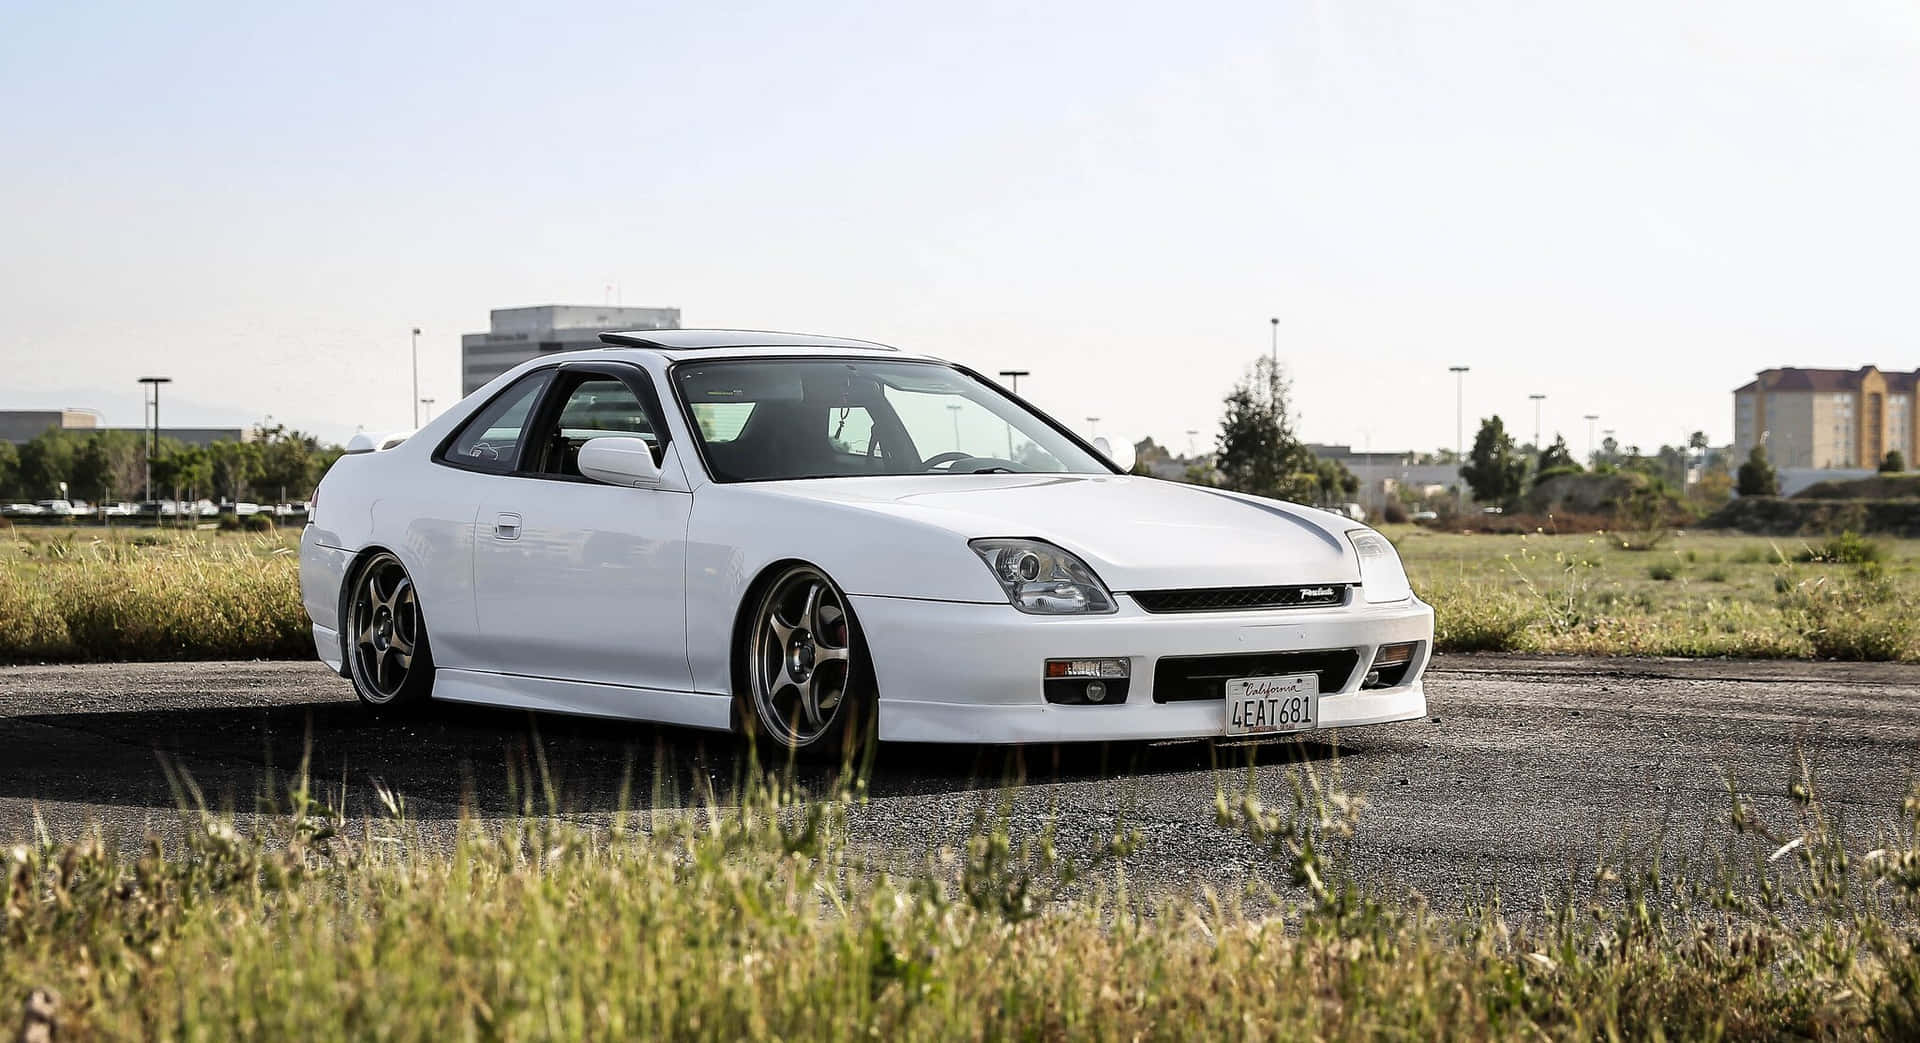 stanced 92 prelude